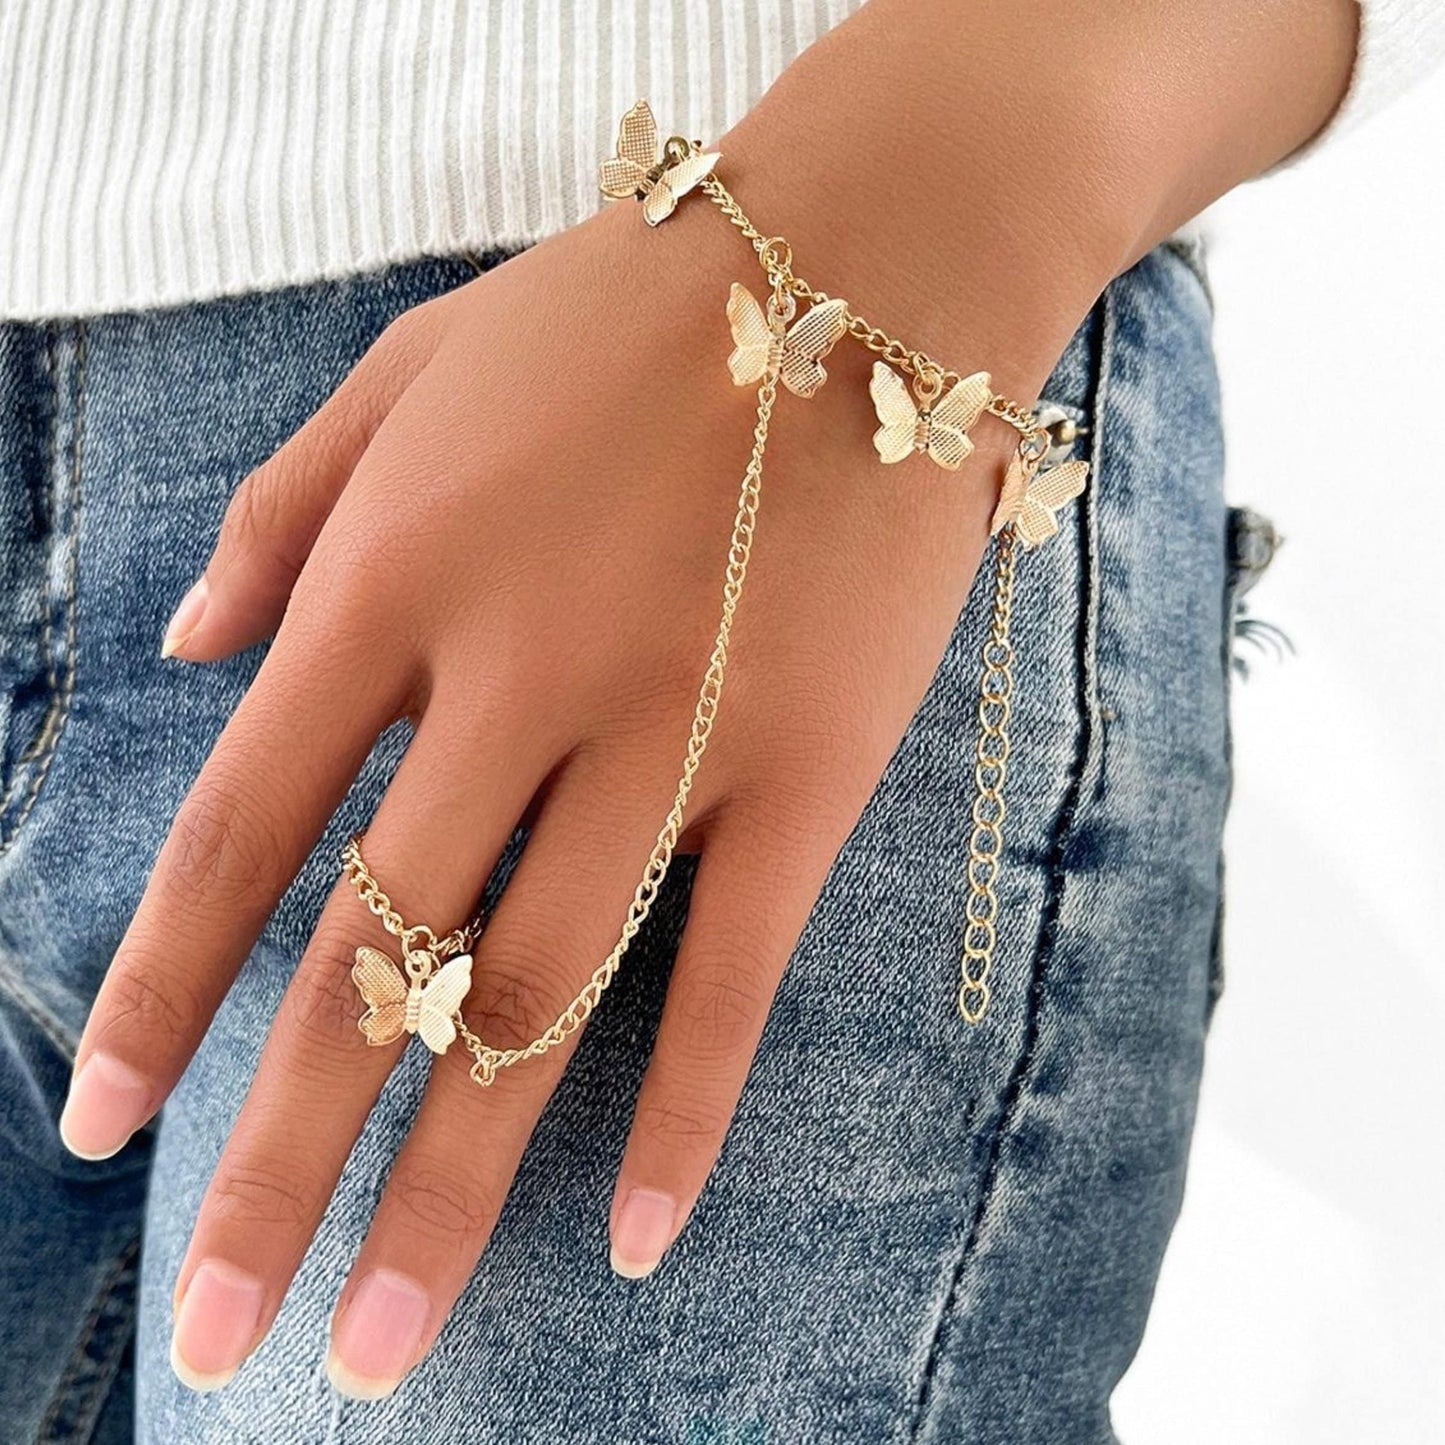 Gold butterfly hand chain, slave bracelet, ring bracelet, finger link chain, charm hand chain bracelet, layering hand peice jewelry, boho